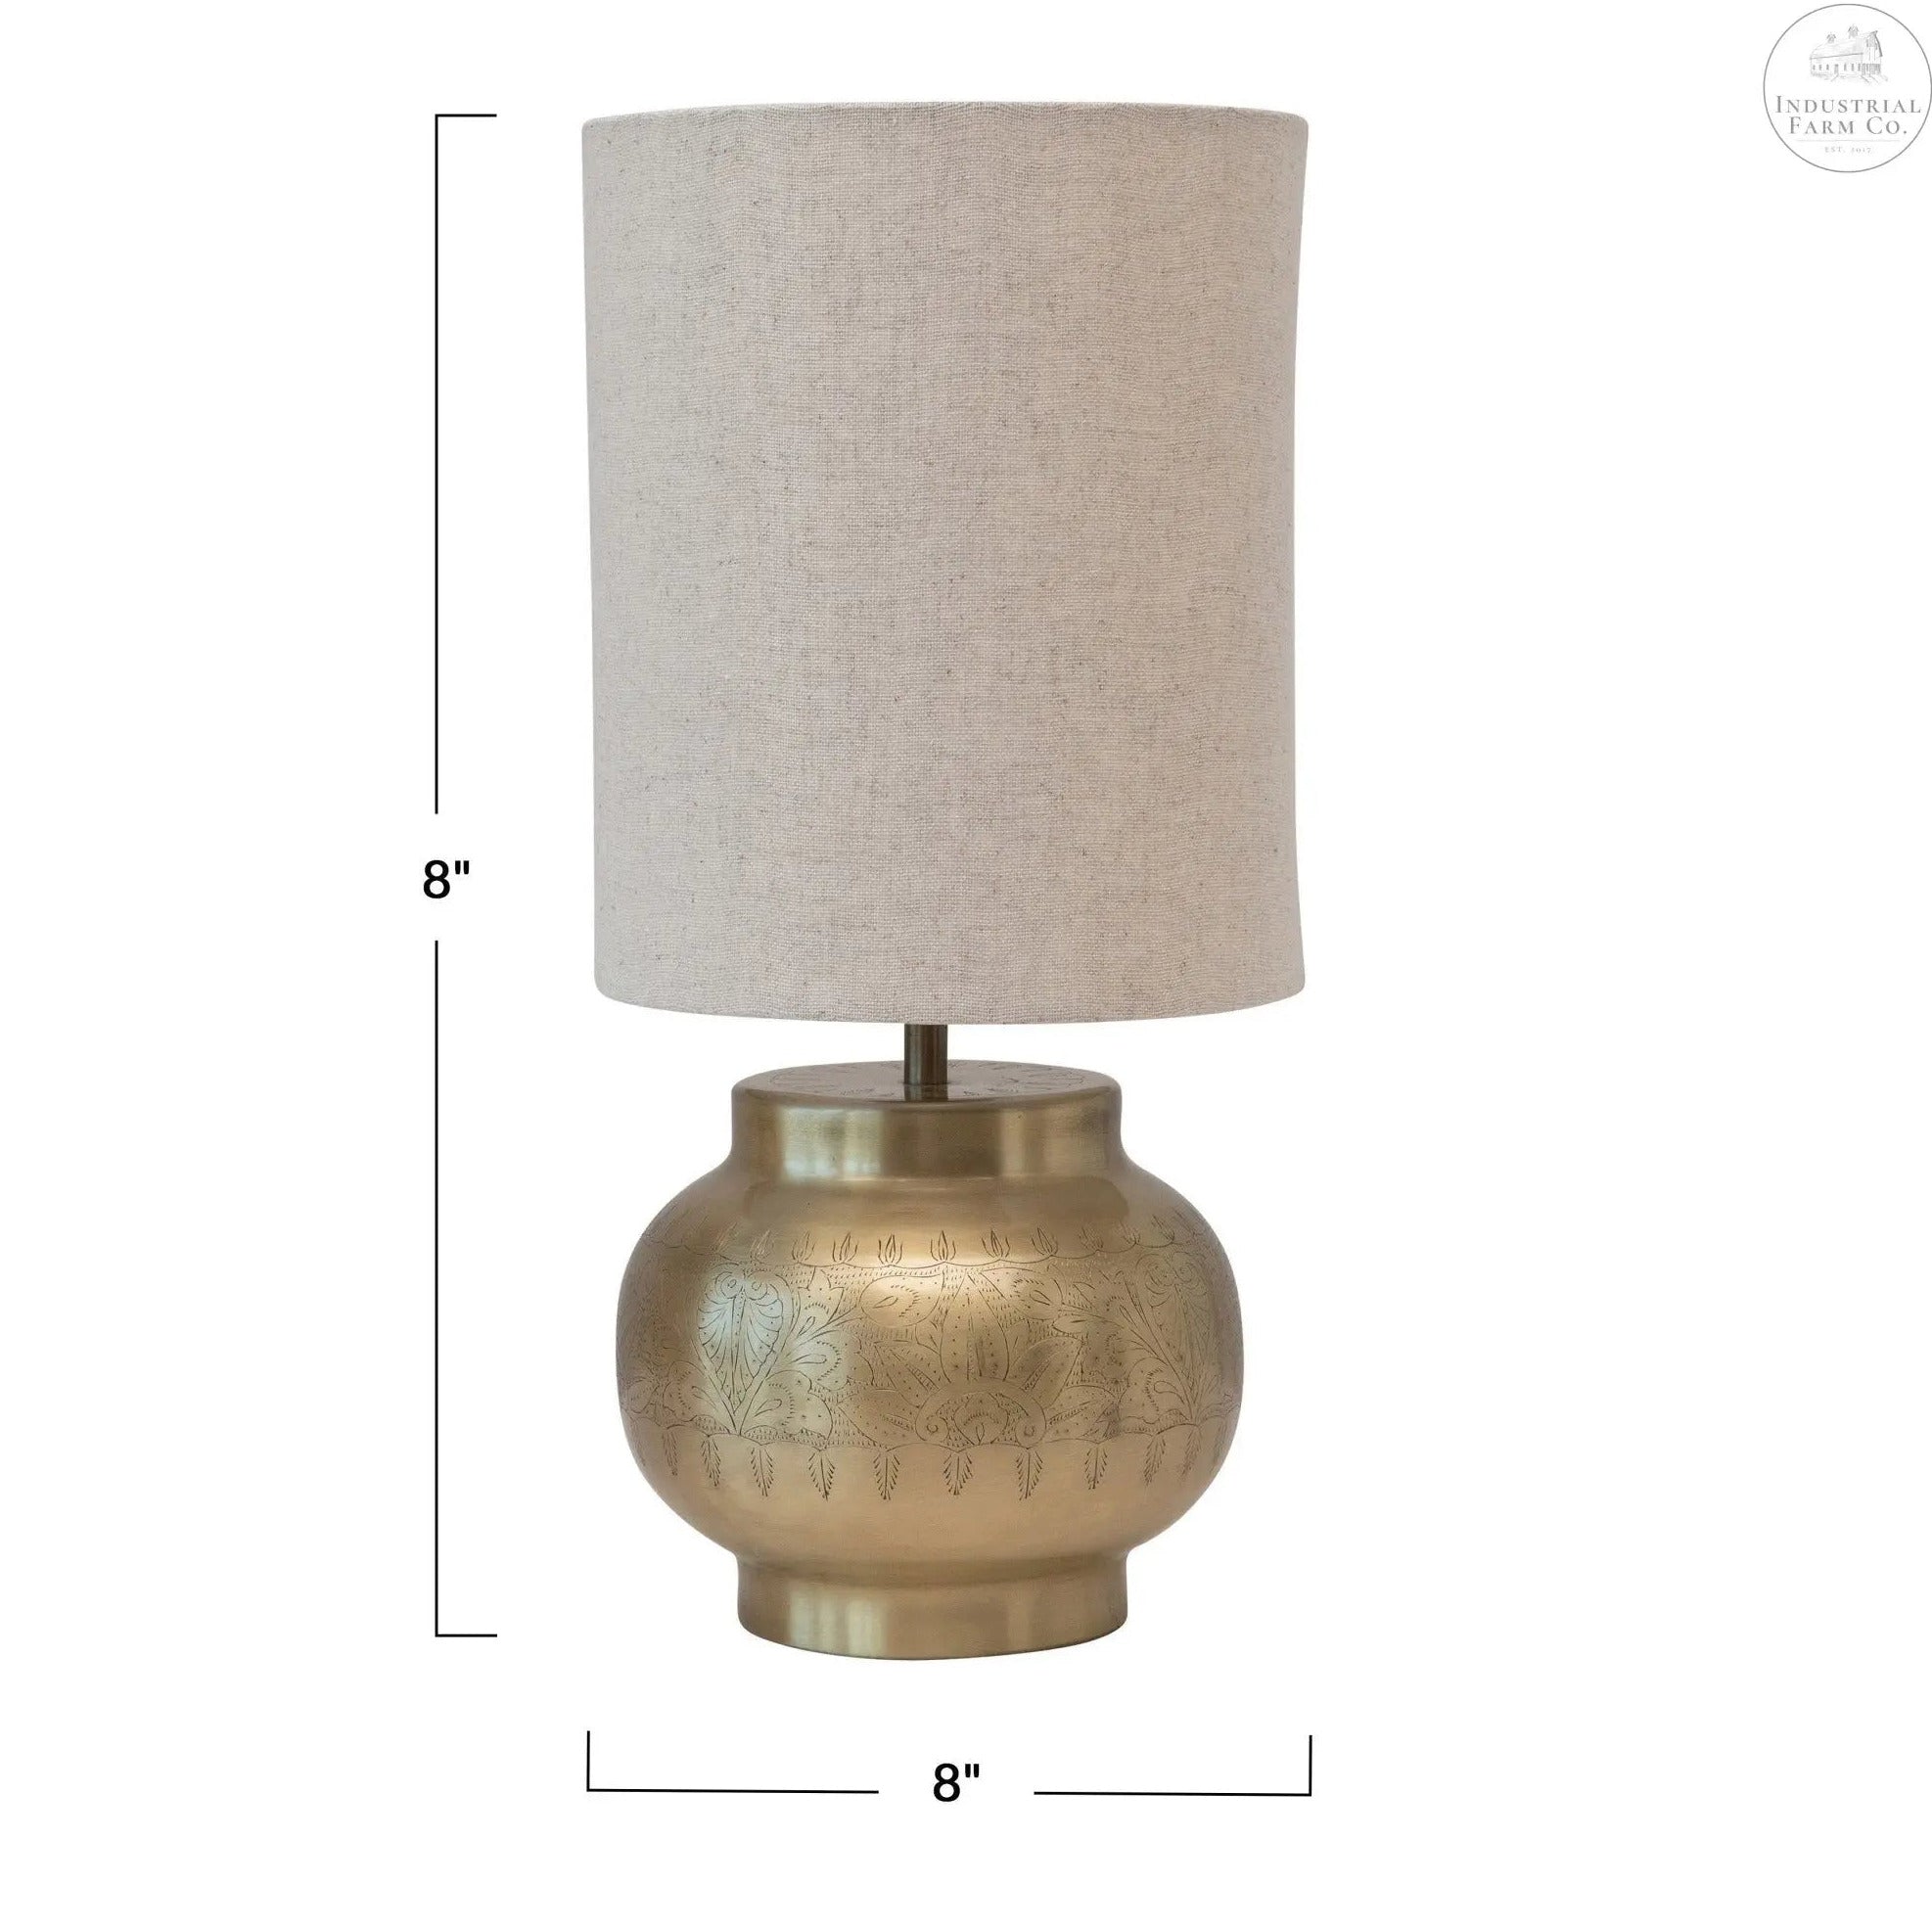 Hammered Brass Jar Table Lamp with Wooden Base - Just Shades